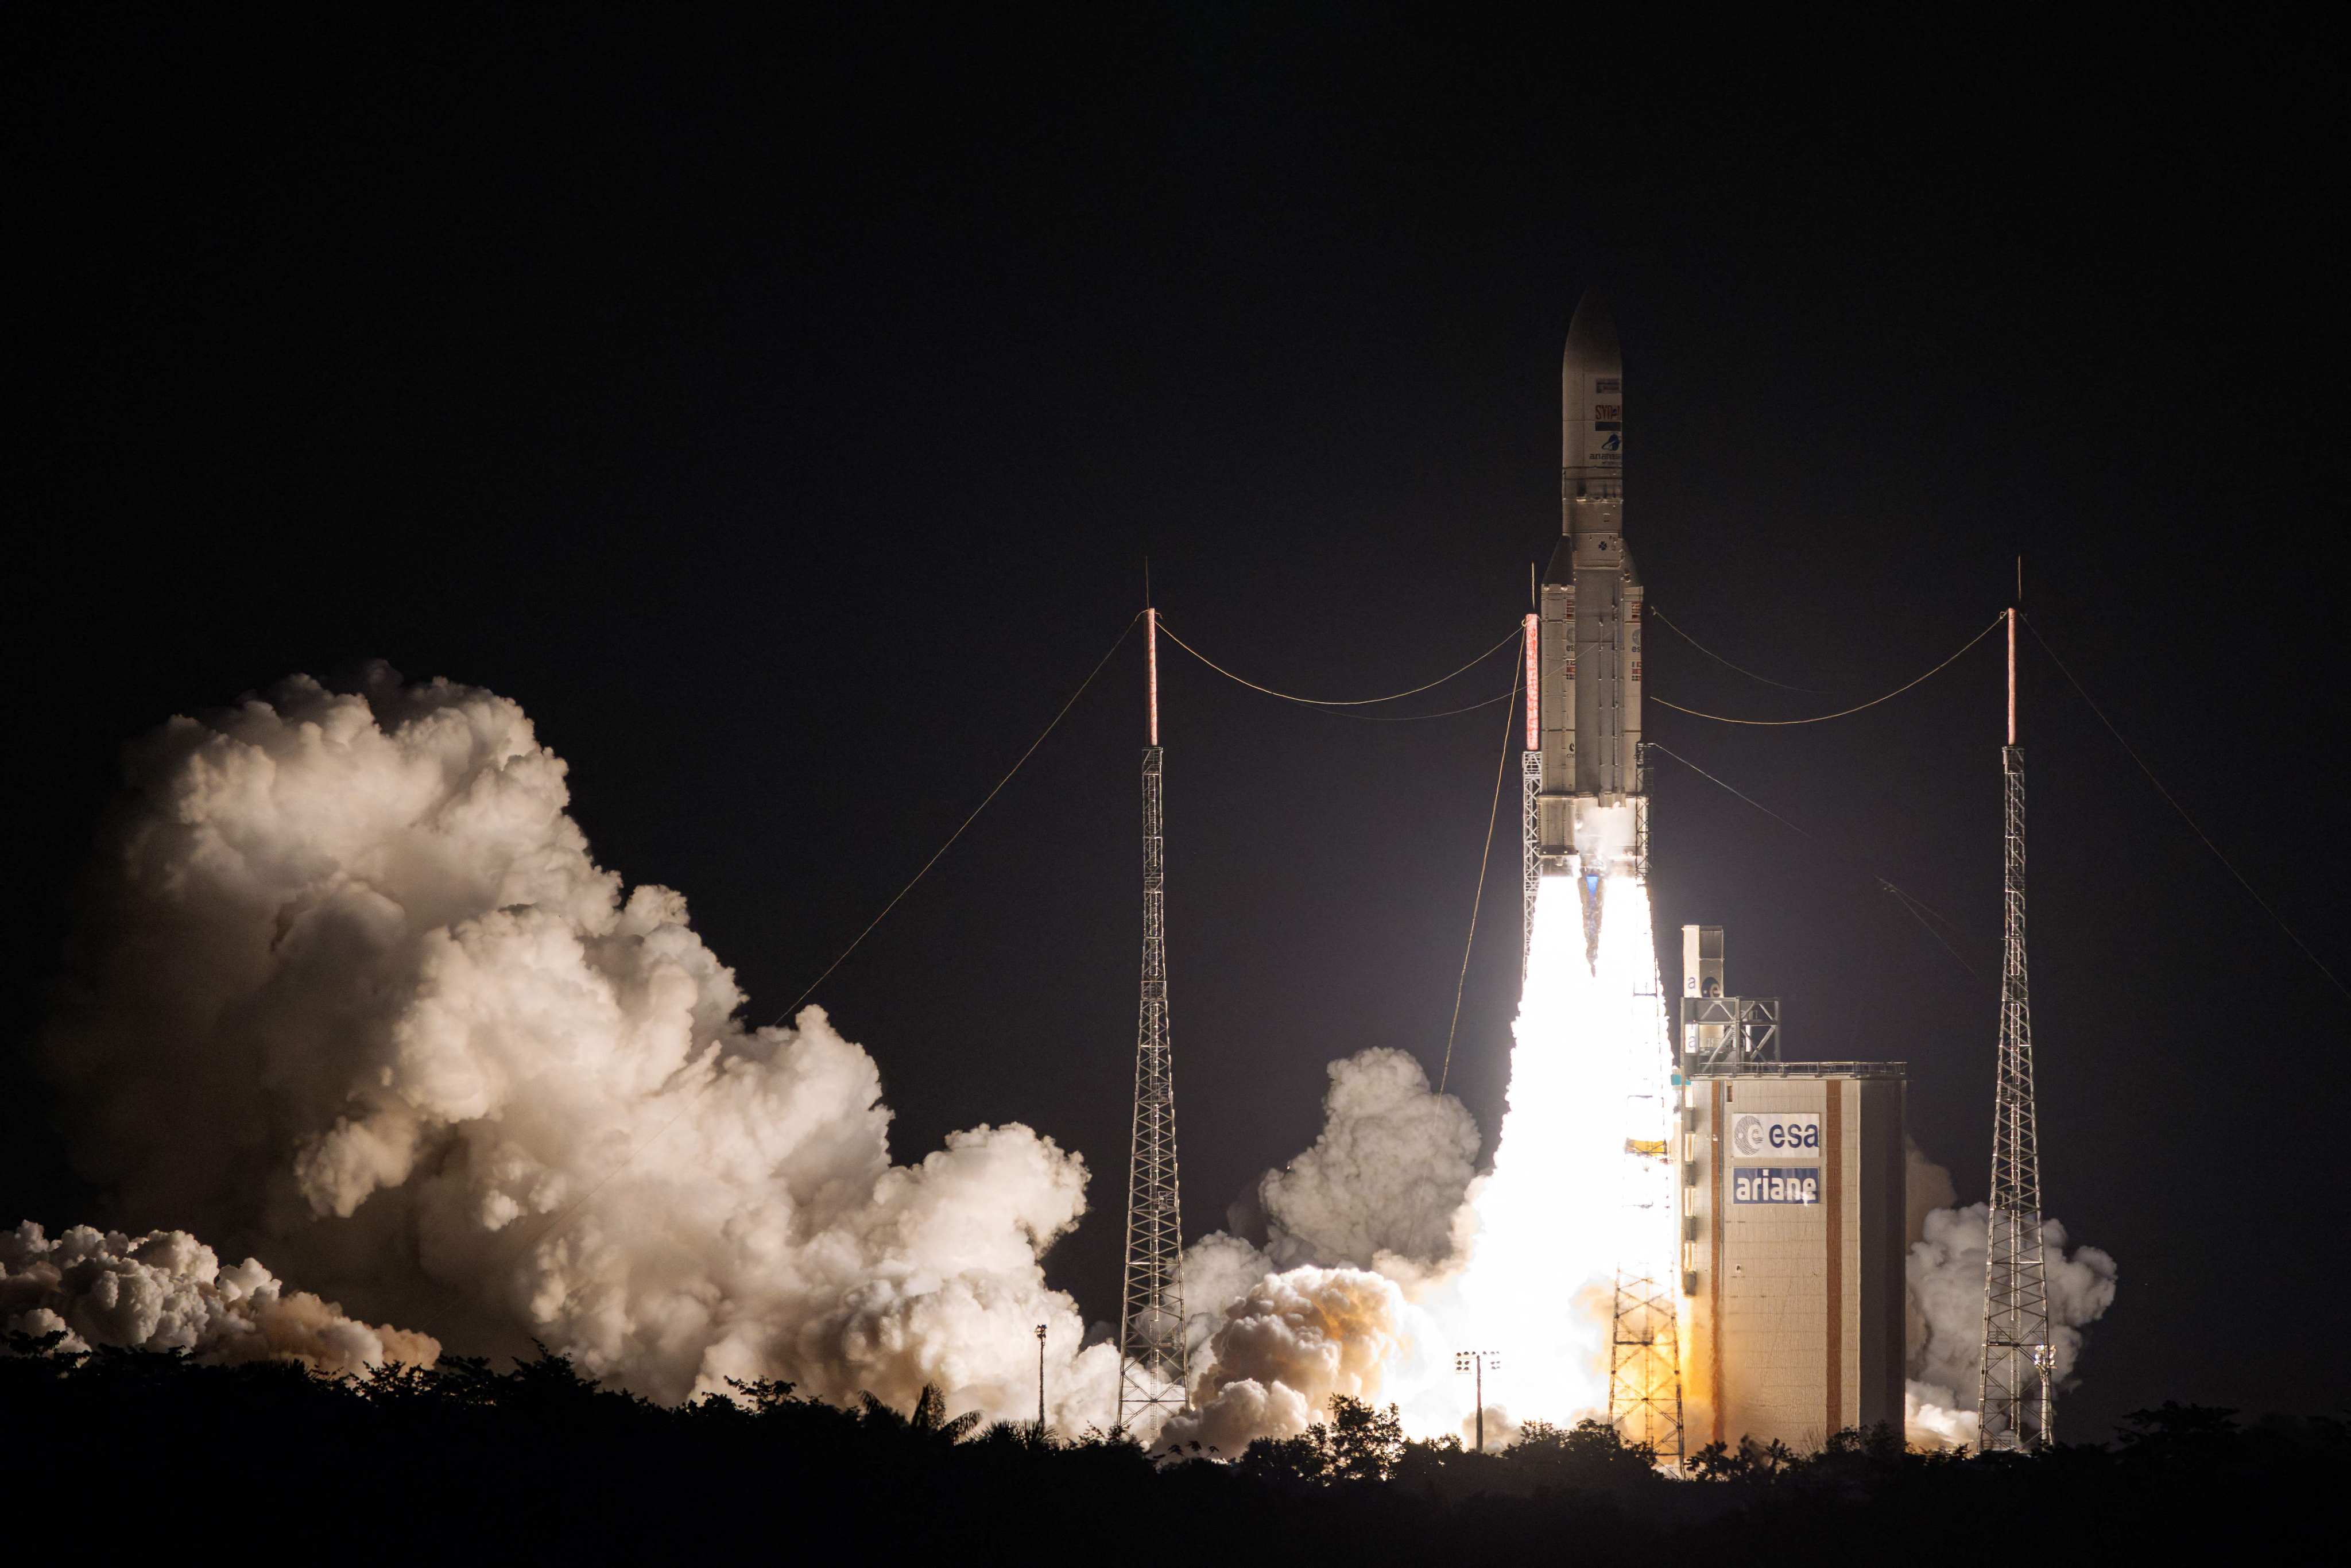 The 117th and final Ariane 5 rocket flight takes place at around 7pm on Wednesday from Europe’s spaceport in Kourou, French Guiana. Photo: AFP